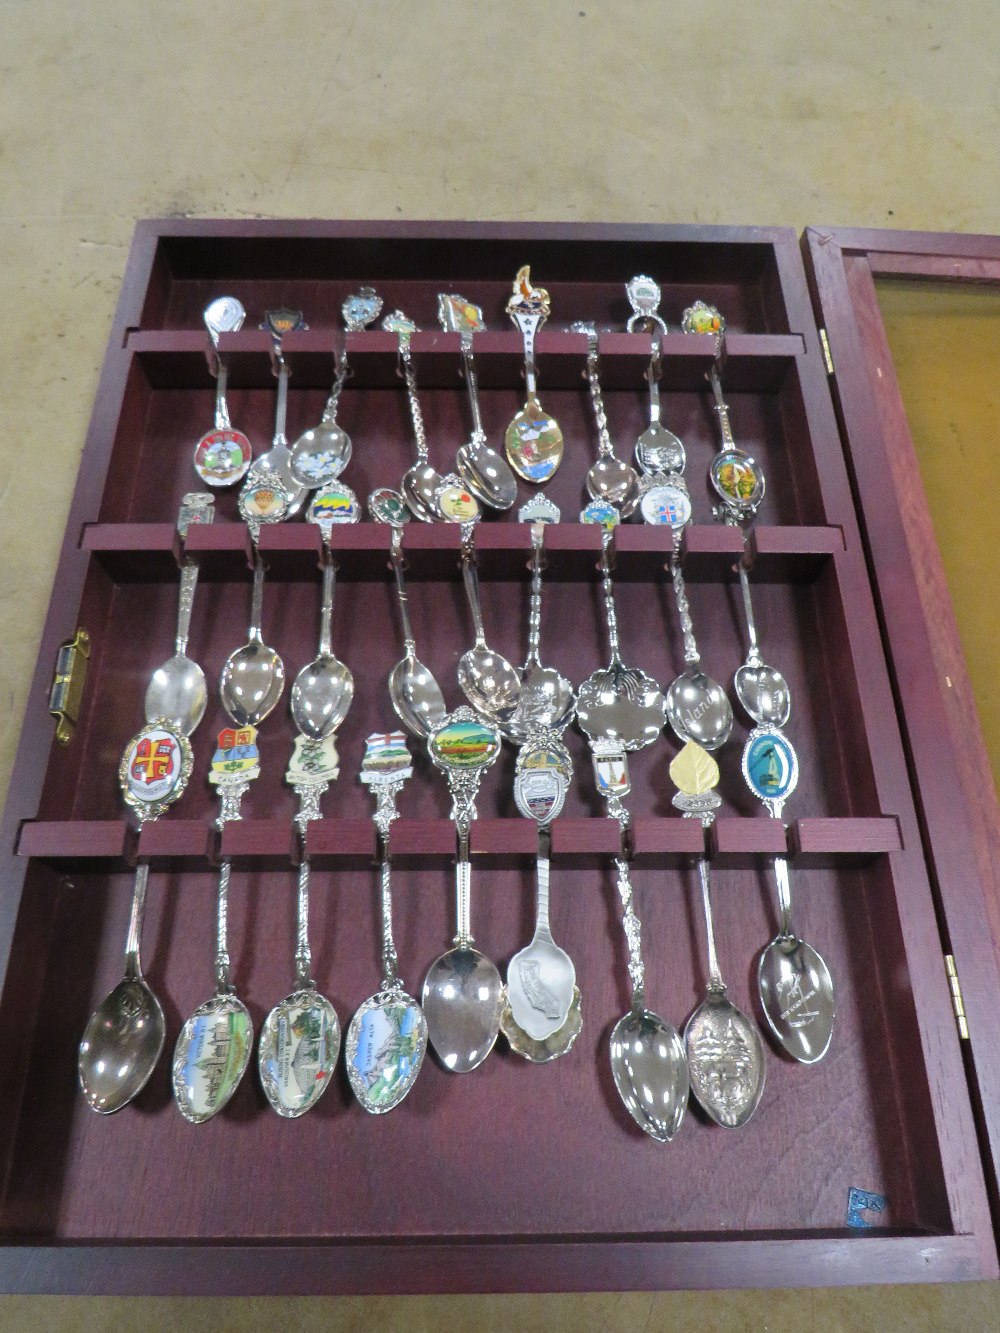 A DISPLAY CASE CONTAINING COLLECTORS SPOONS